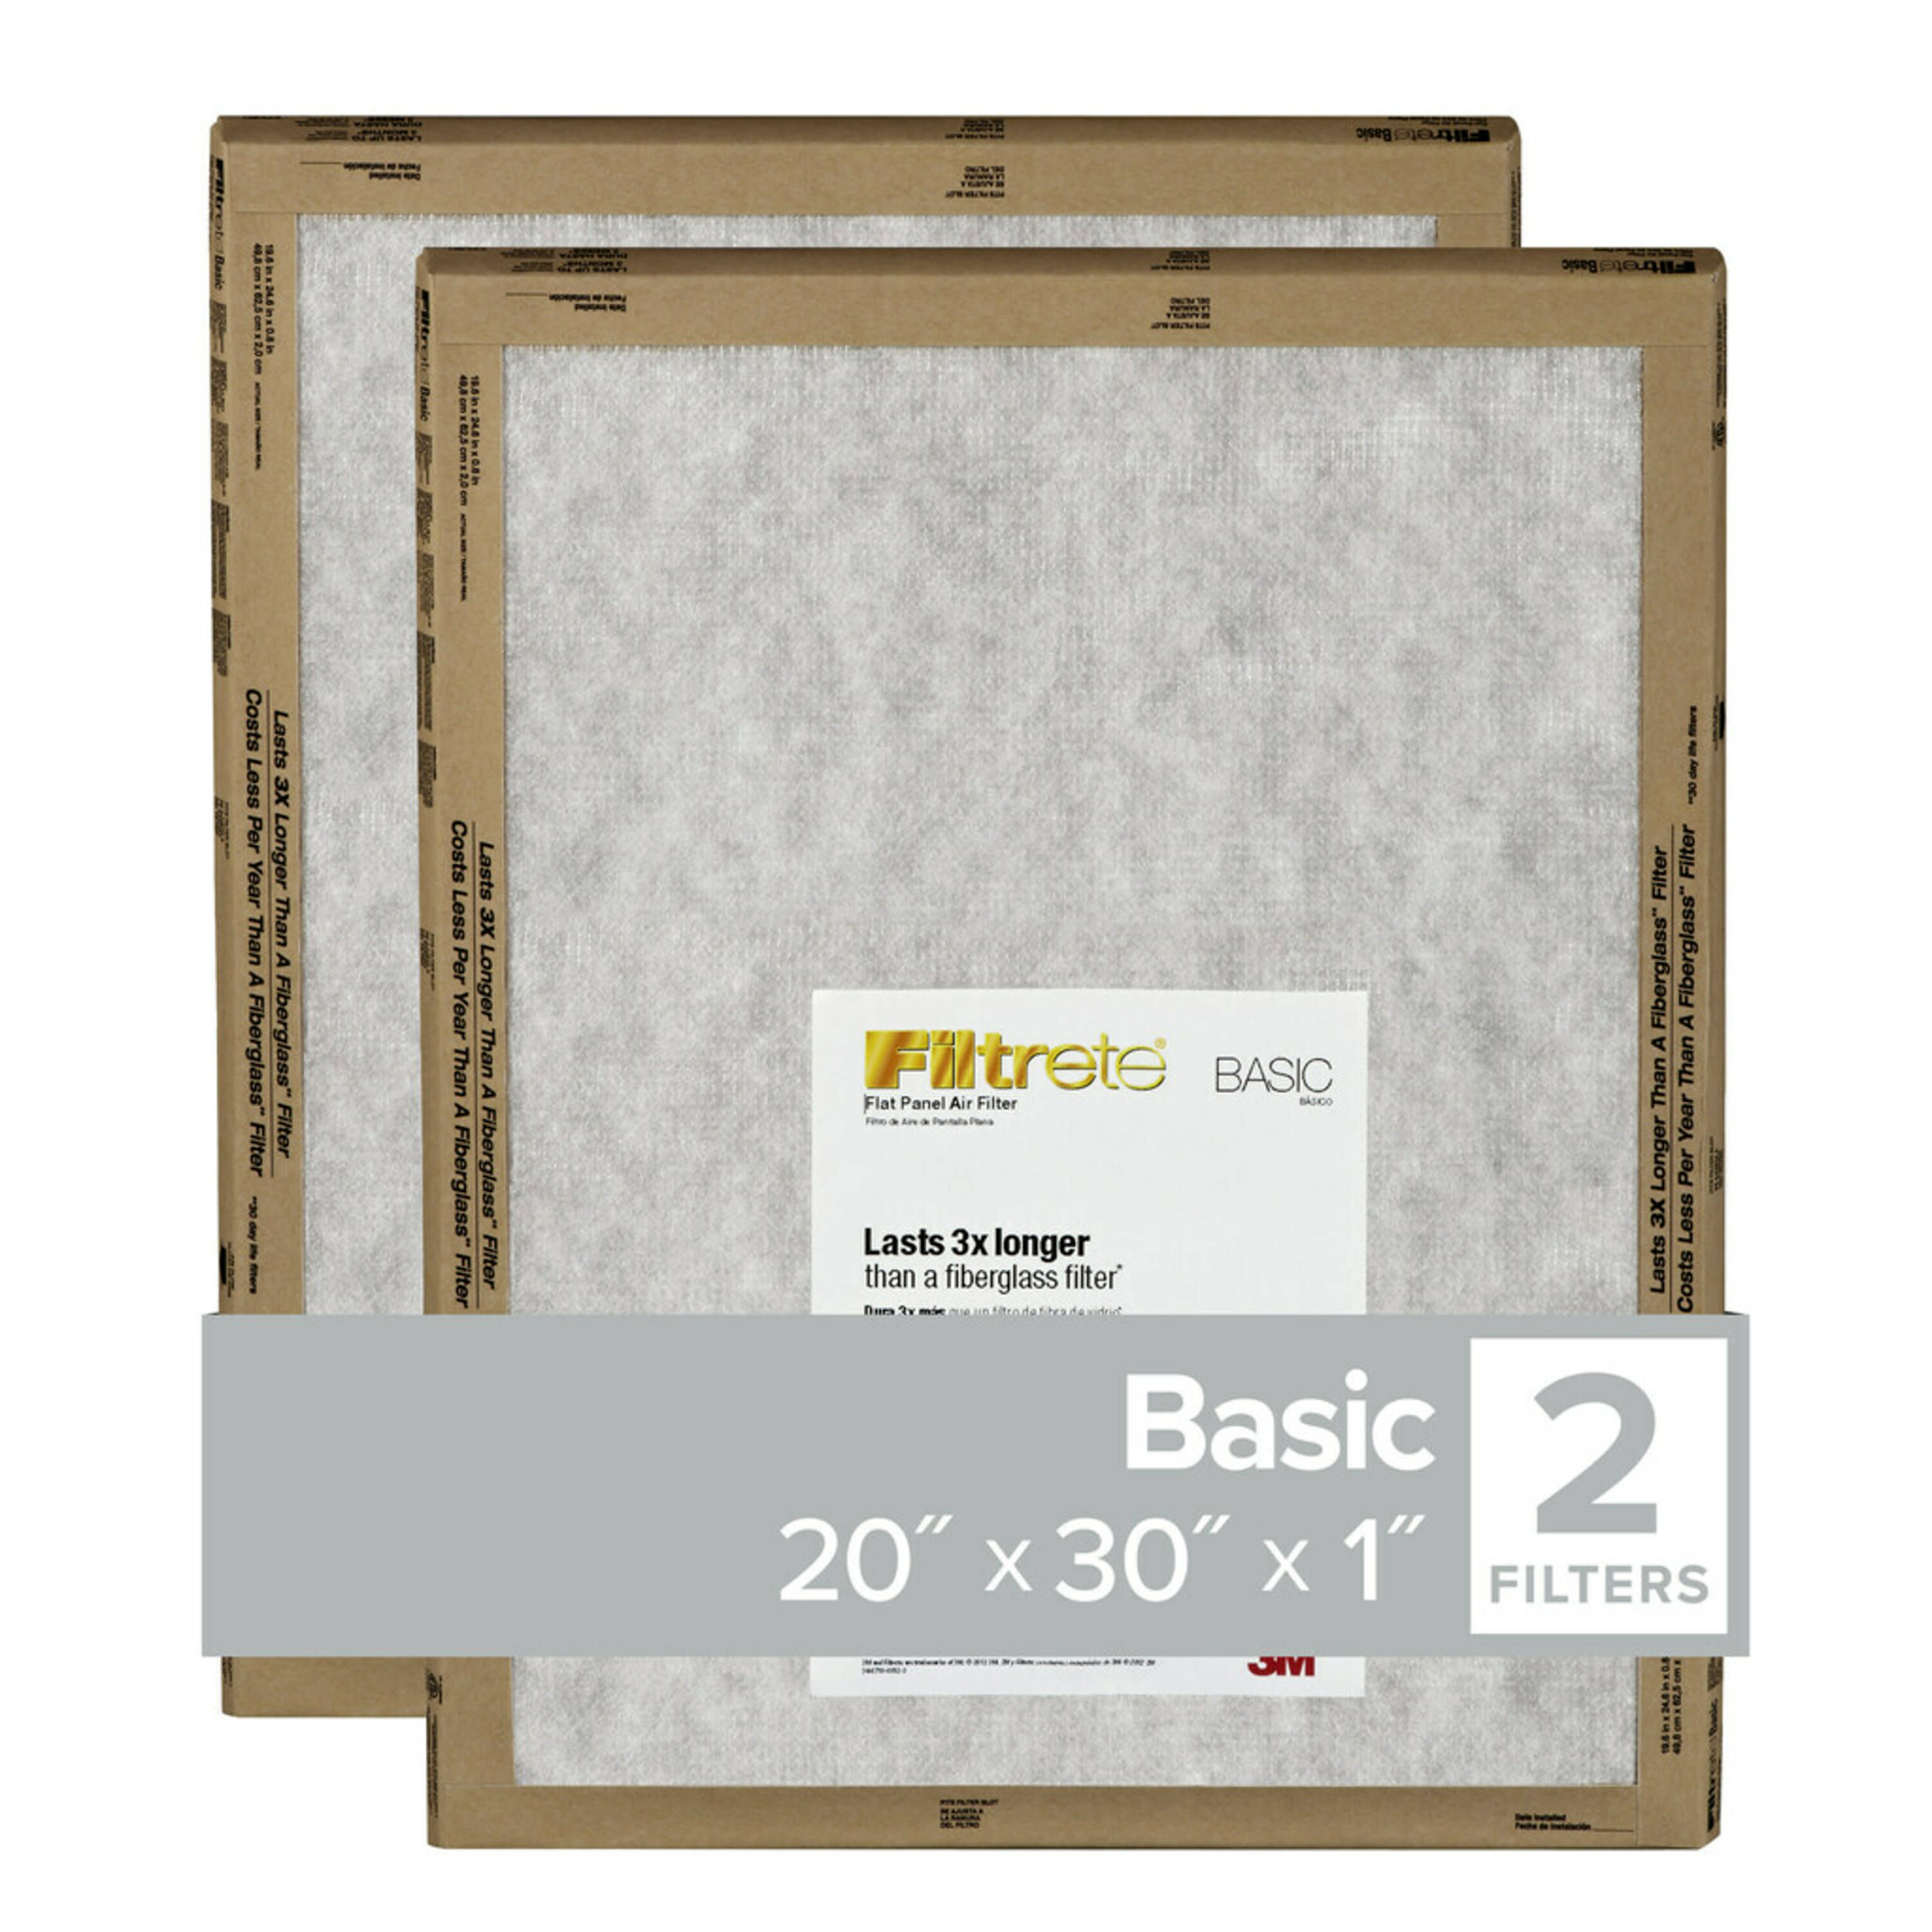 20"x 30"x 1" AC Furnace Air Filter Rigid Washable You Cut to Fit Any Size 